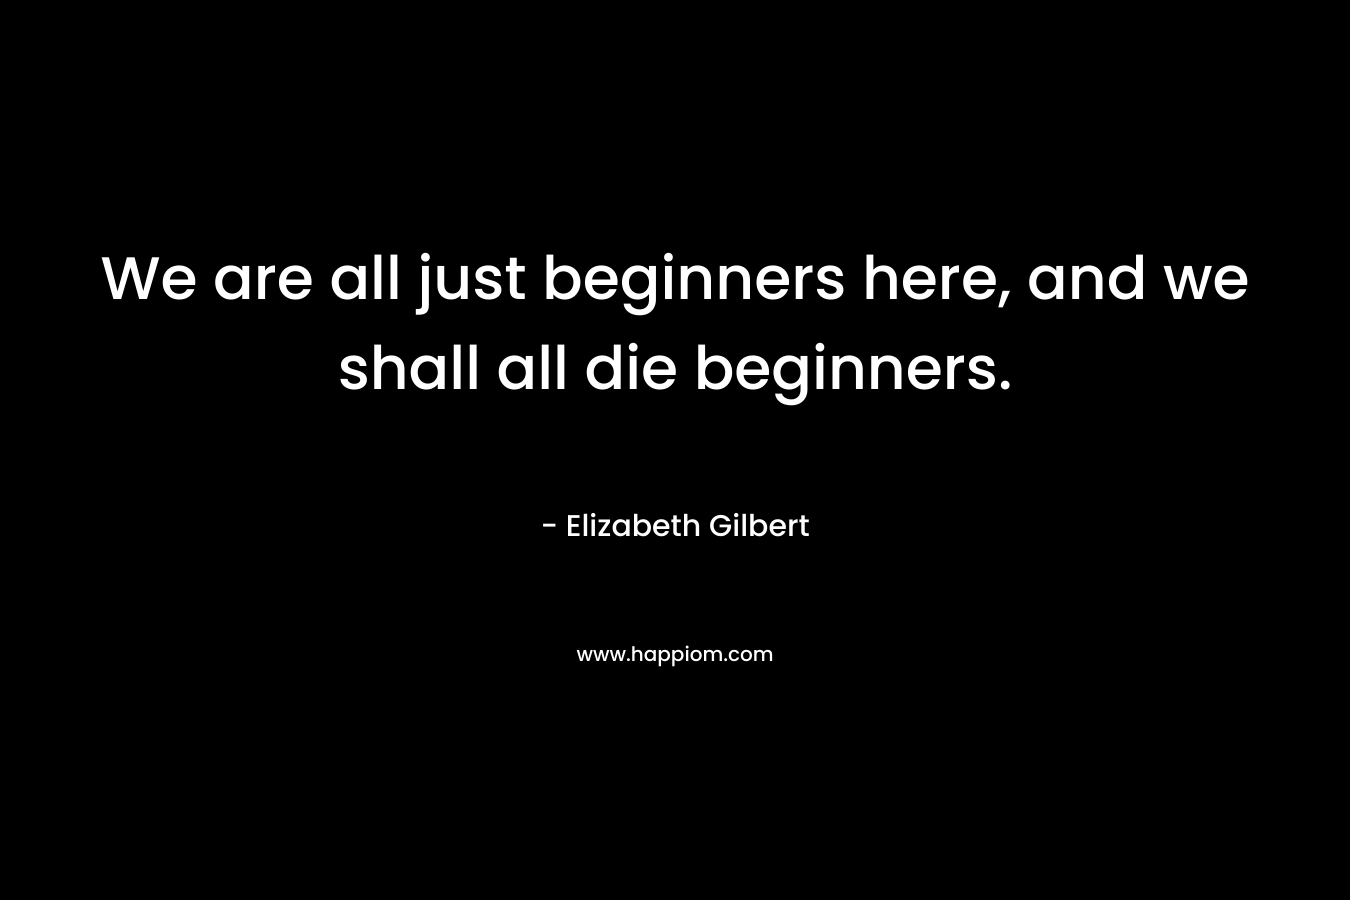 We are all just beginners here, and we shall all die beginners. – Elizabeth Gilbert